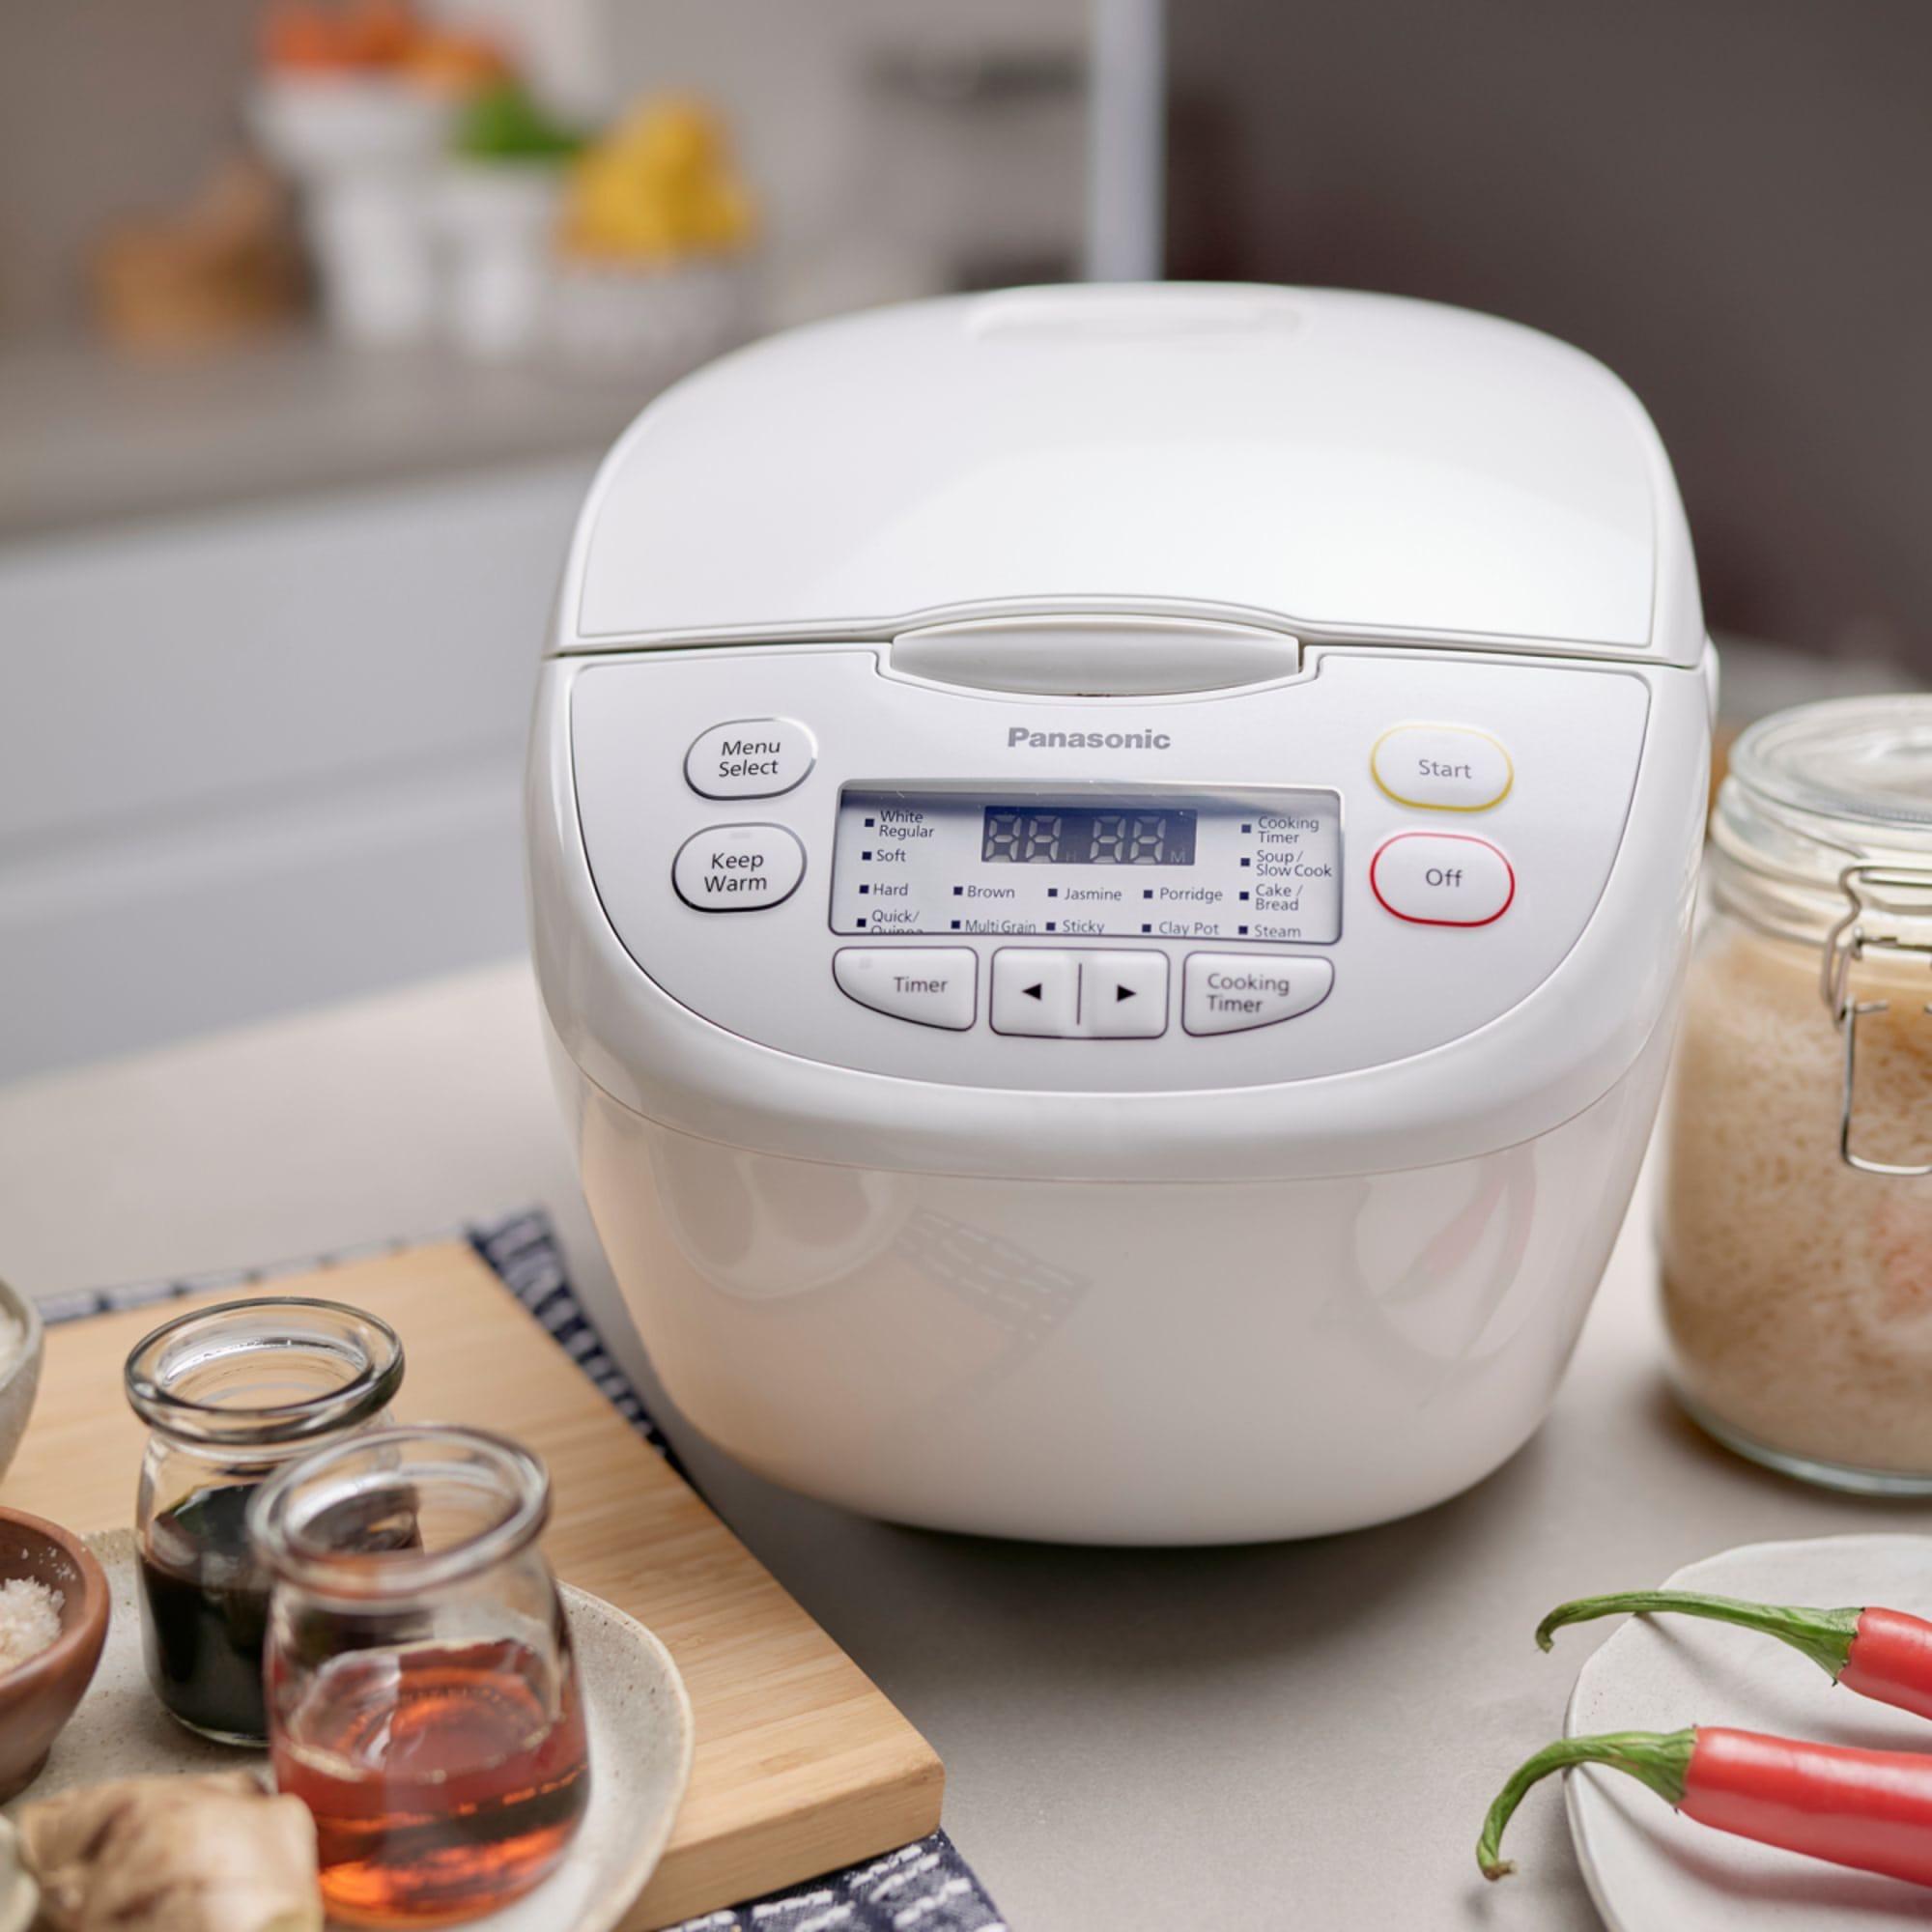 Panasonic Multi Function Rice Cooker 10 Cup White Image 4